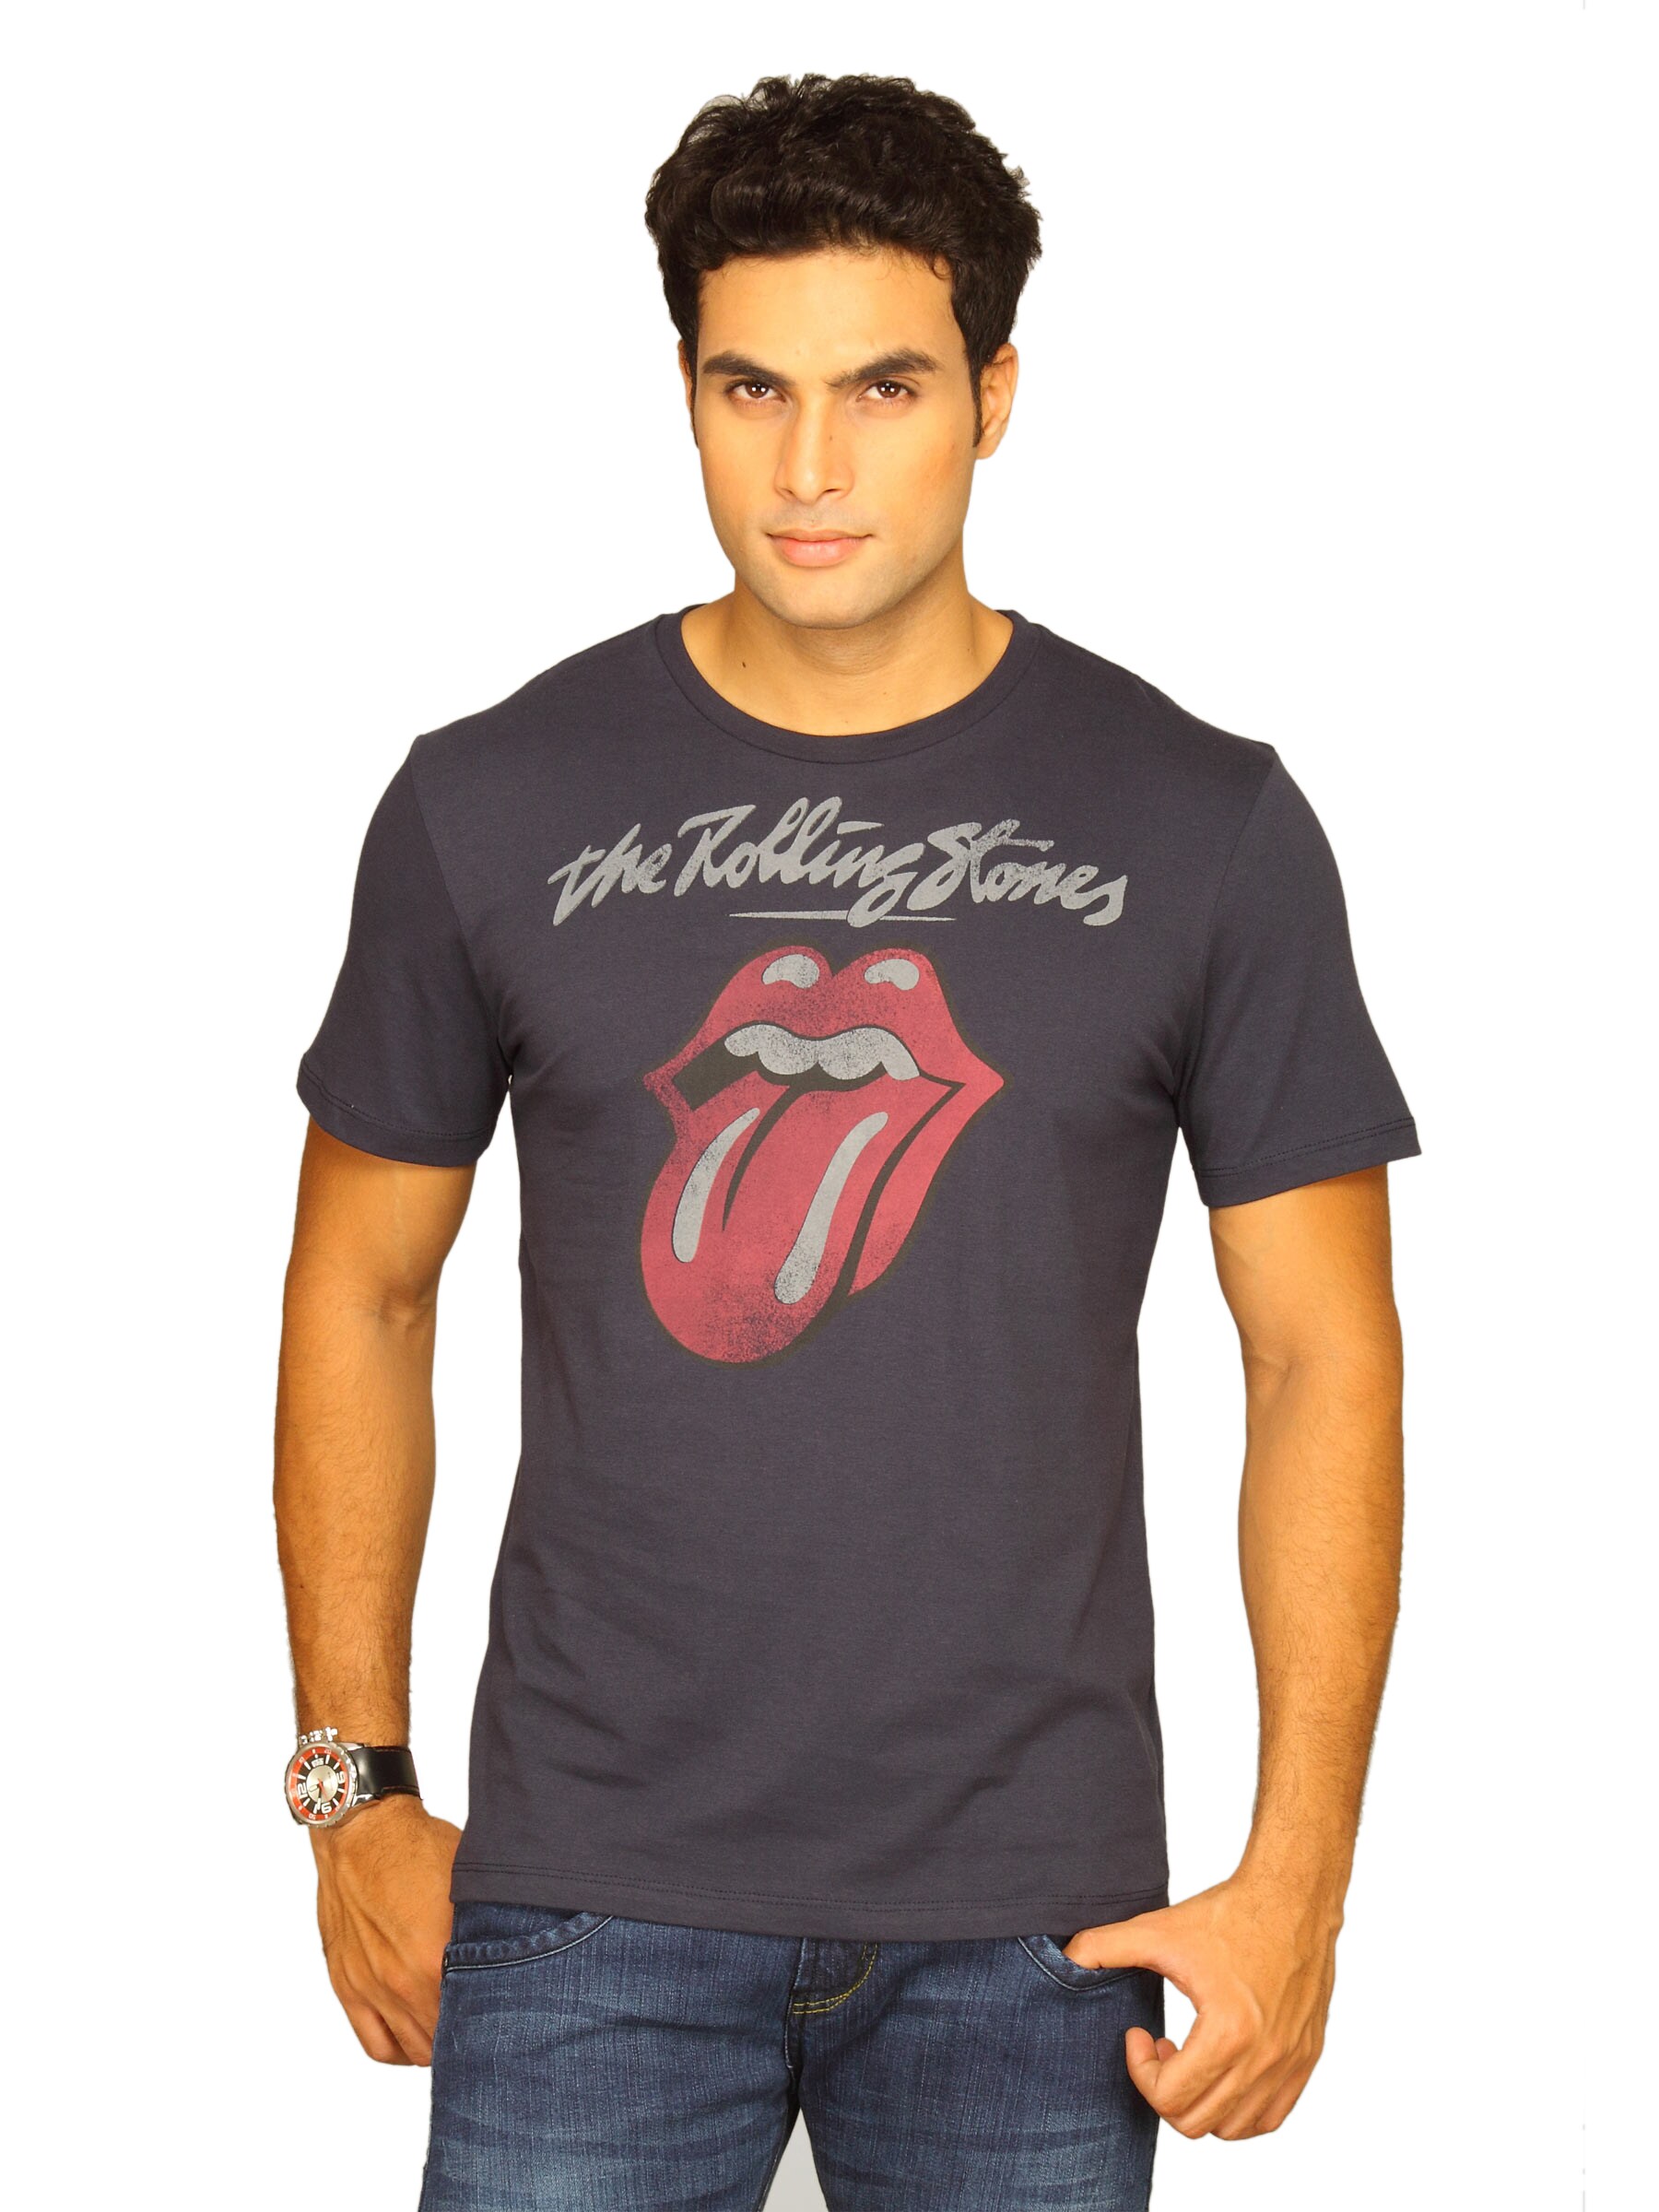 Rolling Stone Men's The Rolling Stones Navy T-shirt